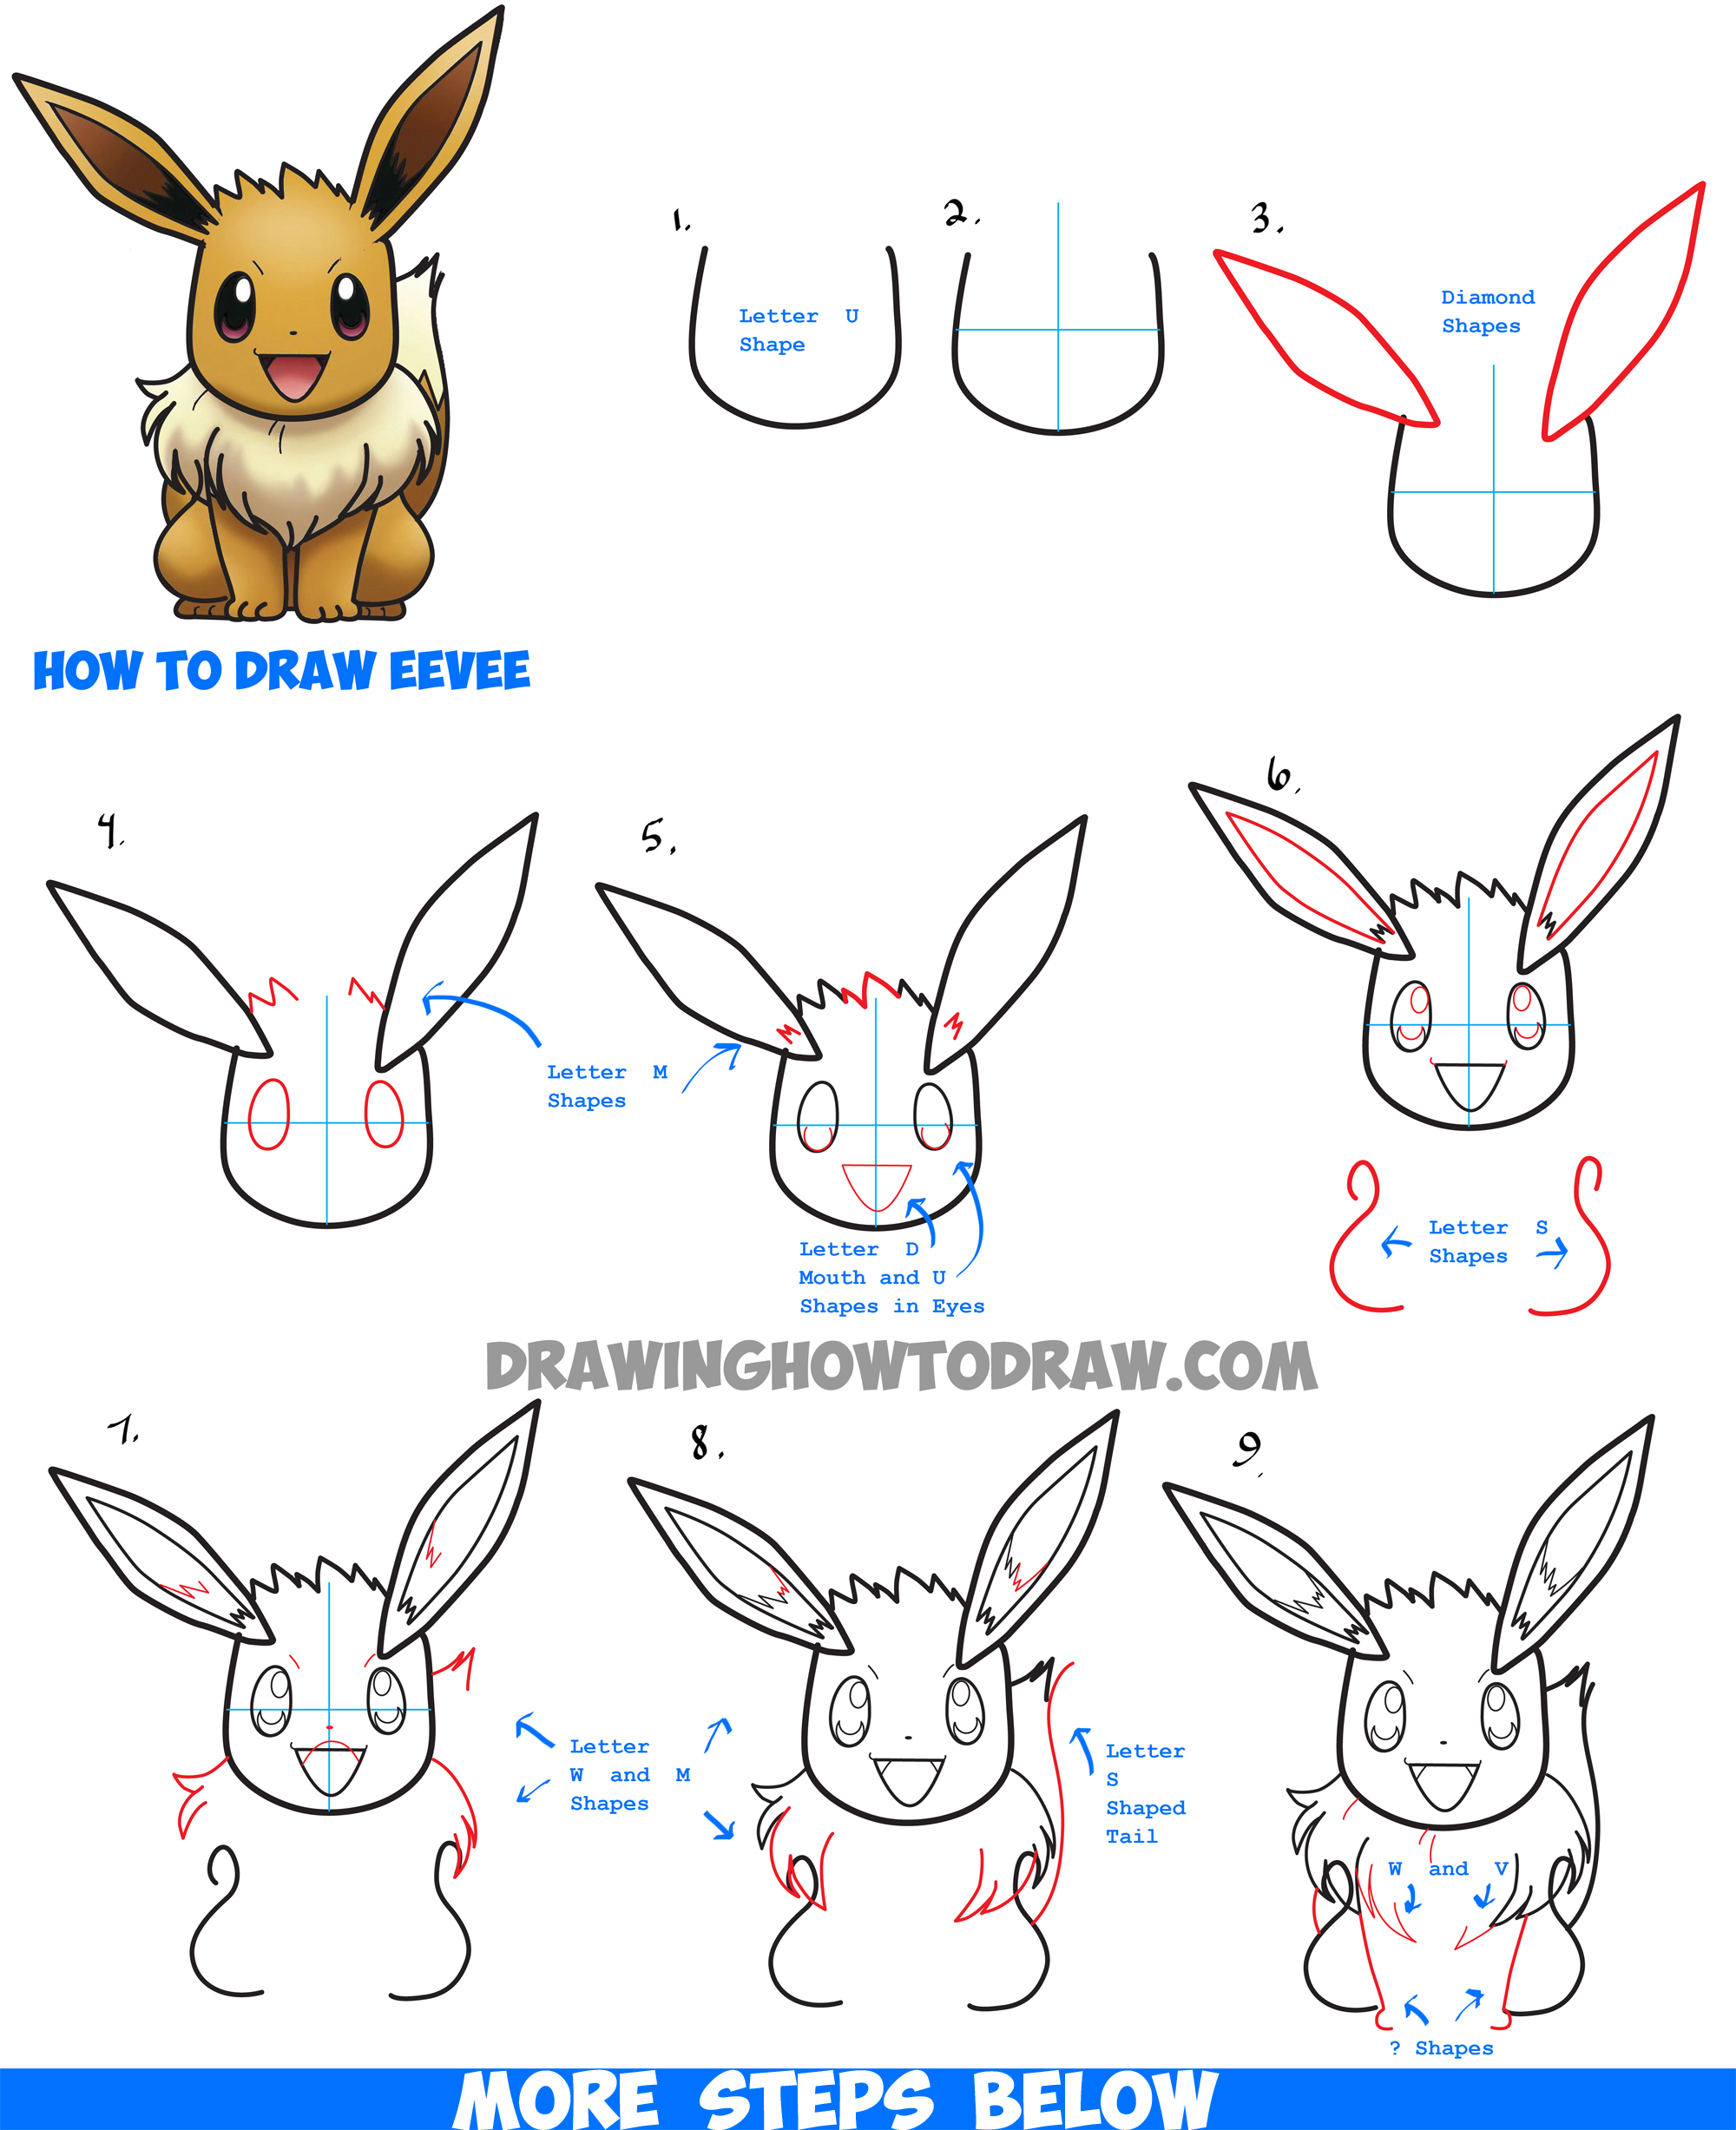 How to Draw Eevee from Pokemon with Easy Step by Step Drawing Tutorial